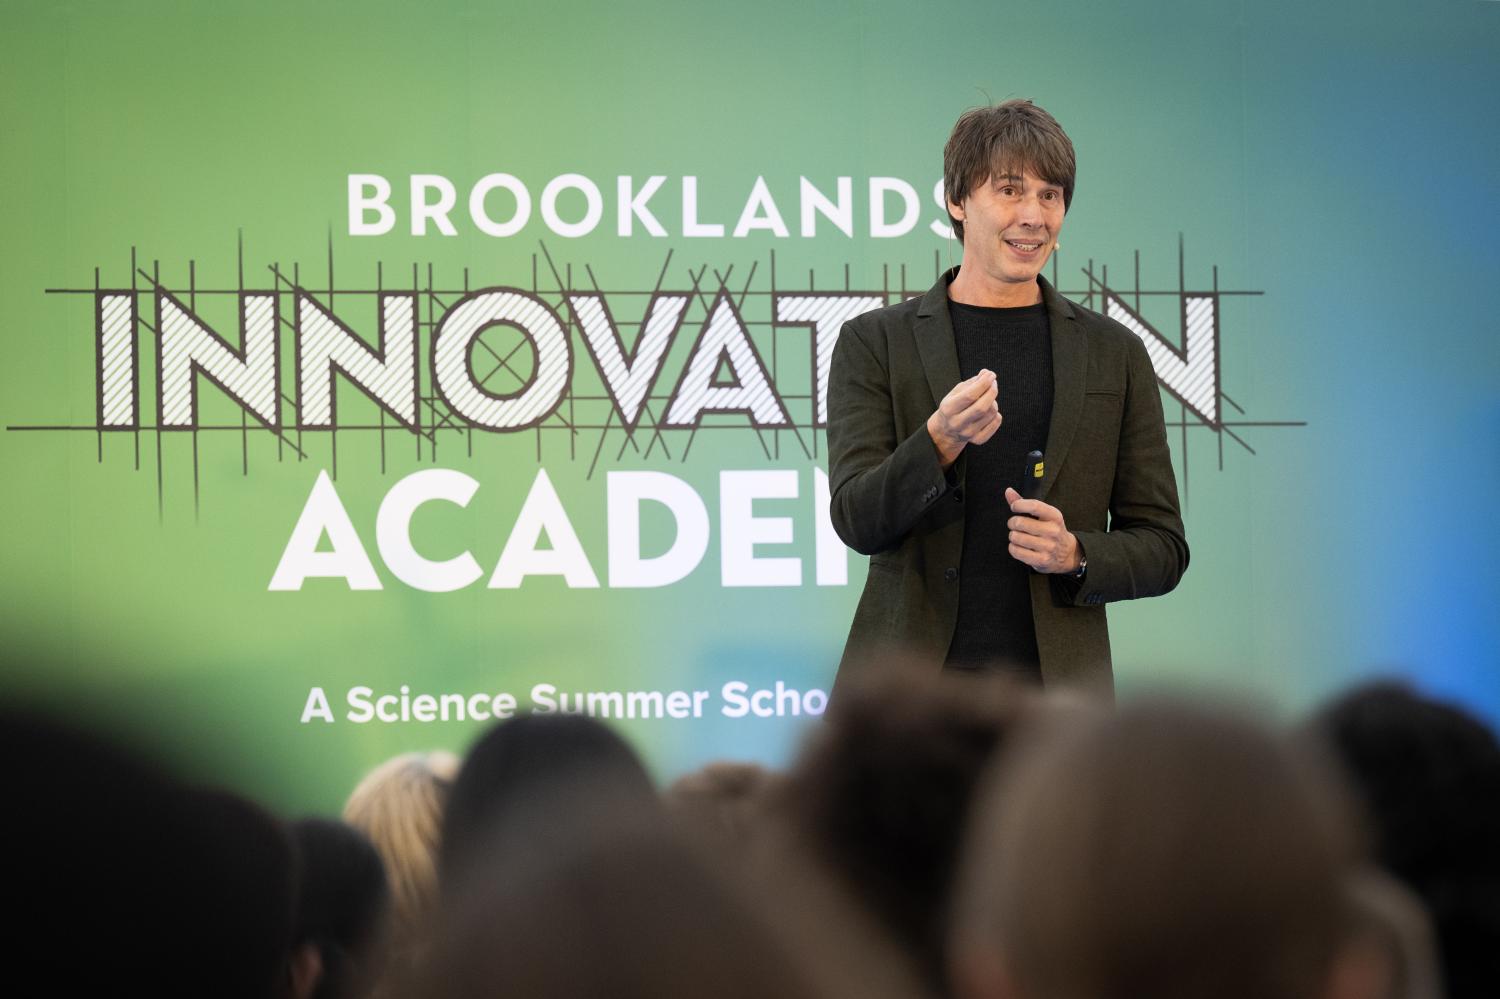 Professor Brian Cox presenting at the Brooklands Innovation Academy. Credit JP Bland (photo)